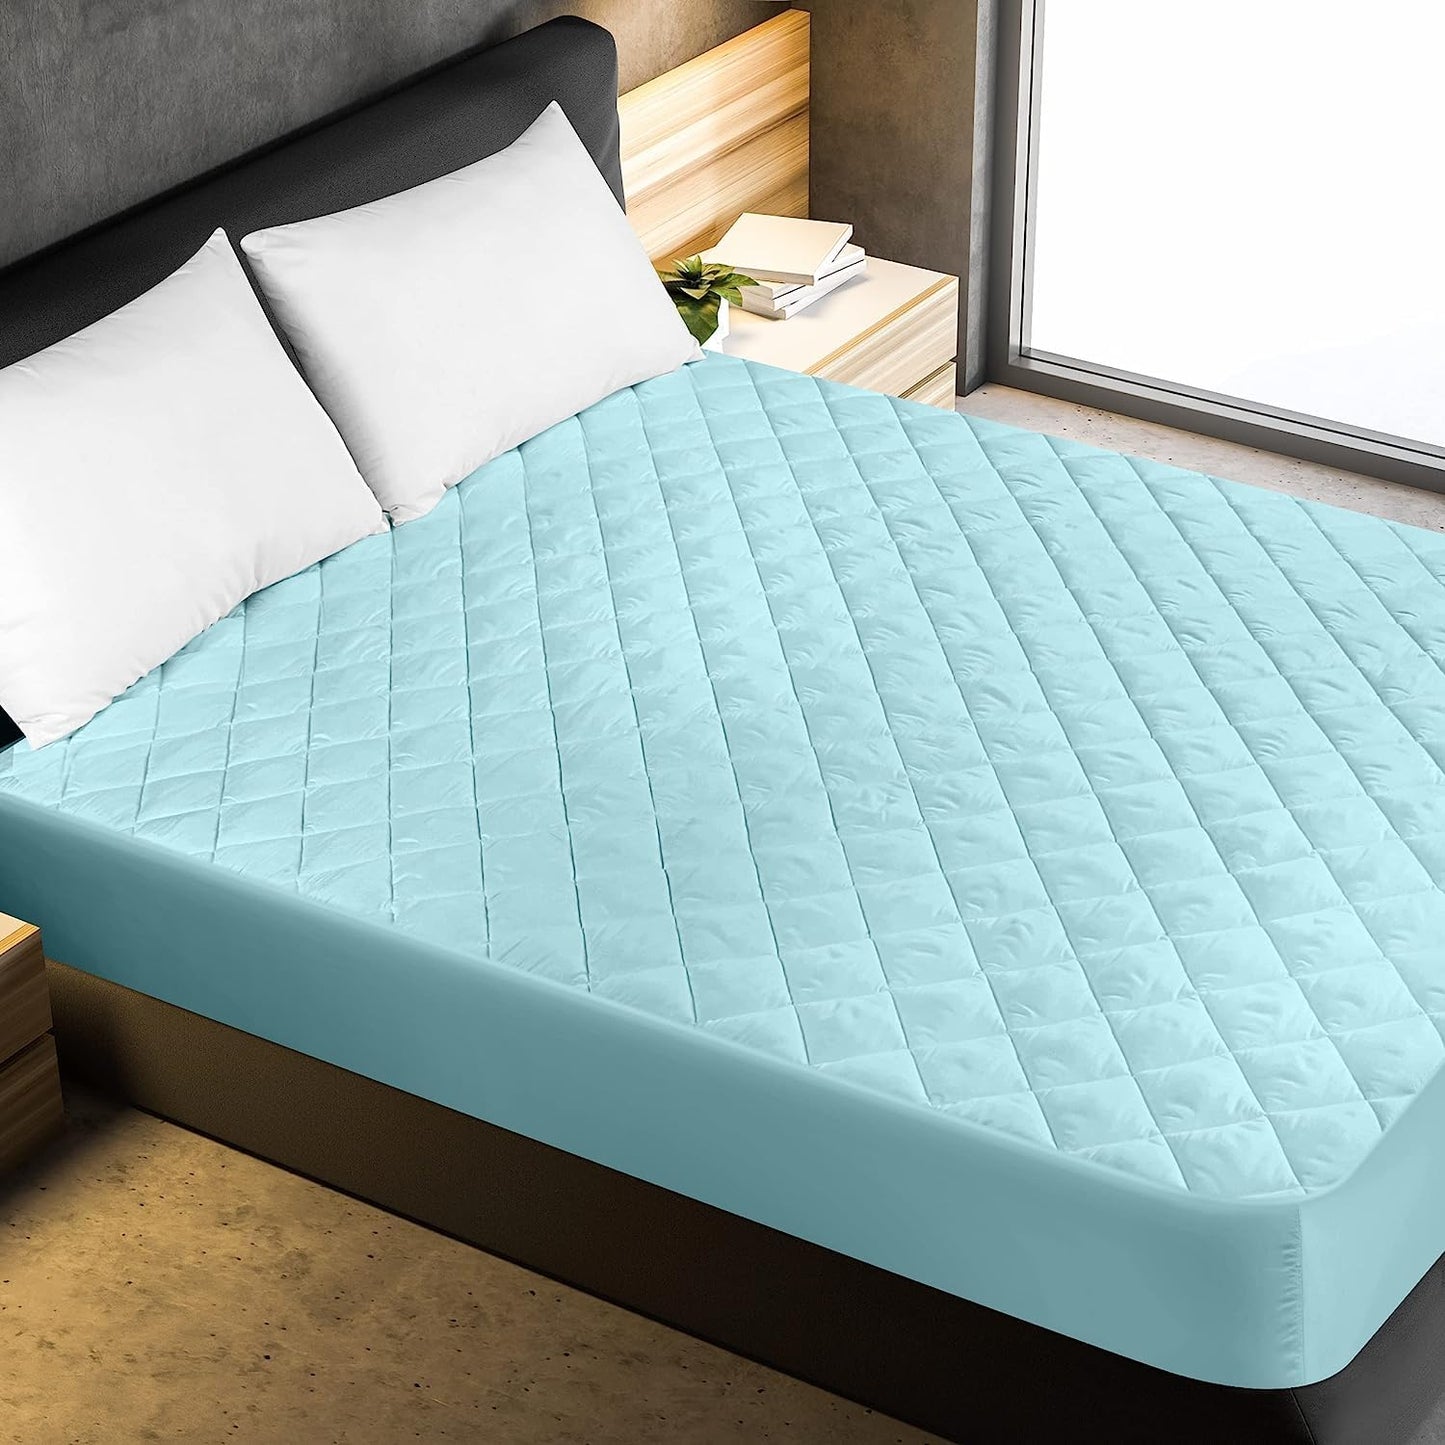 Waterproof Quilted Mattress Protector King Size with Elastic all around (Turquoise Blue)